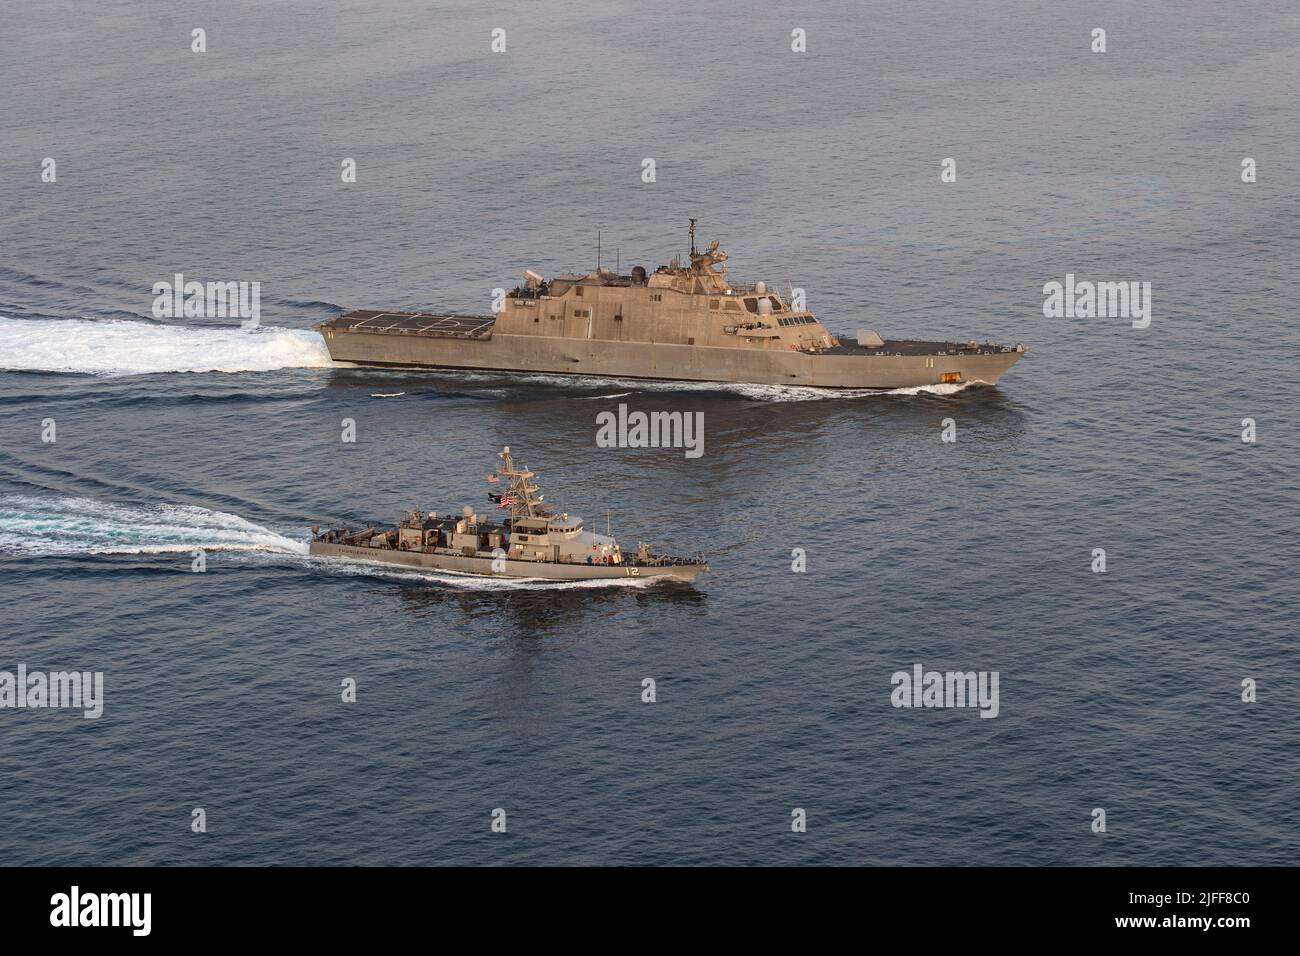 220624-N-NR343-2906 STRAIT OF HORMUZ (June 24, 2022) Littoral combat ship USS Sioux City (LCS 11) and coastal patrol ship USS Thunderbolt (PC 12) transit the Strait of Hormuz, June 24. Sioux City is deployed to the U.S. 5th Fleet area of operations to help ensure maritime security and stability in the Middle East region. (U.S. Navy photo by Mass Communication Specialist 3rd Class Nicholas A. Russell) Stock Photo